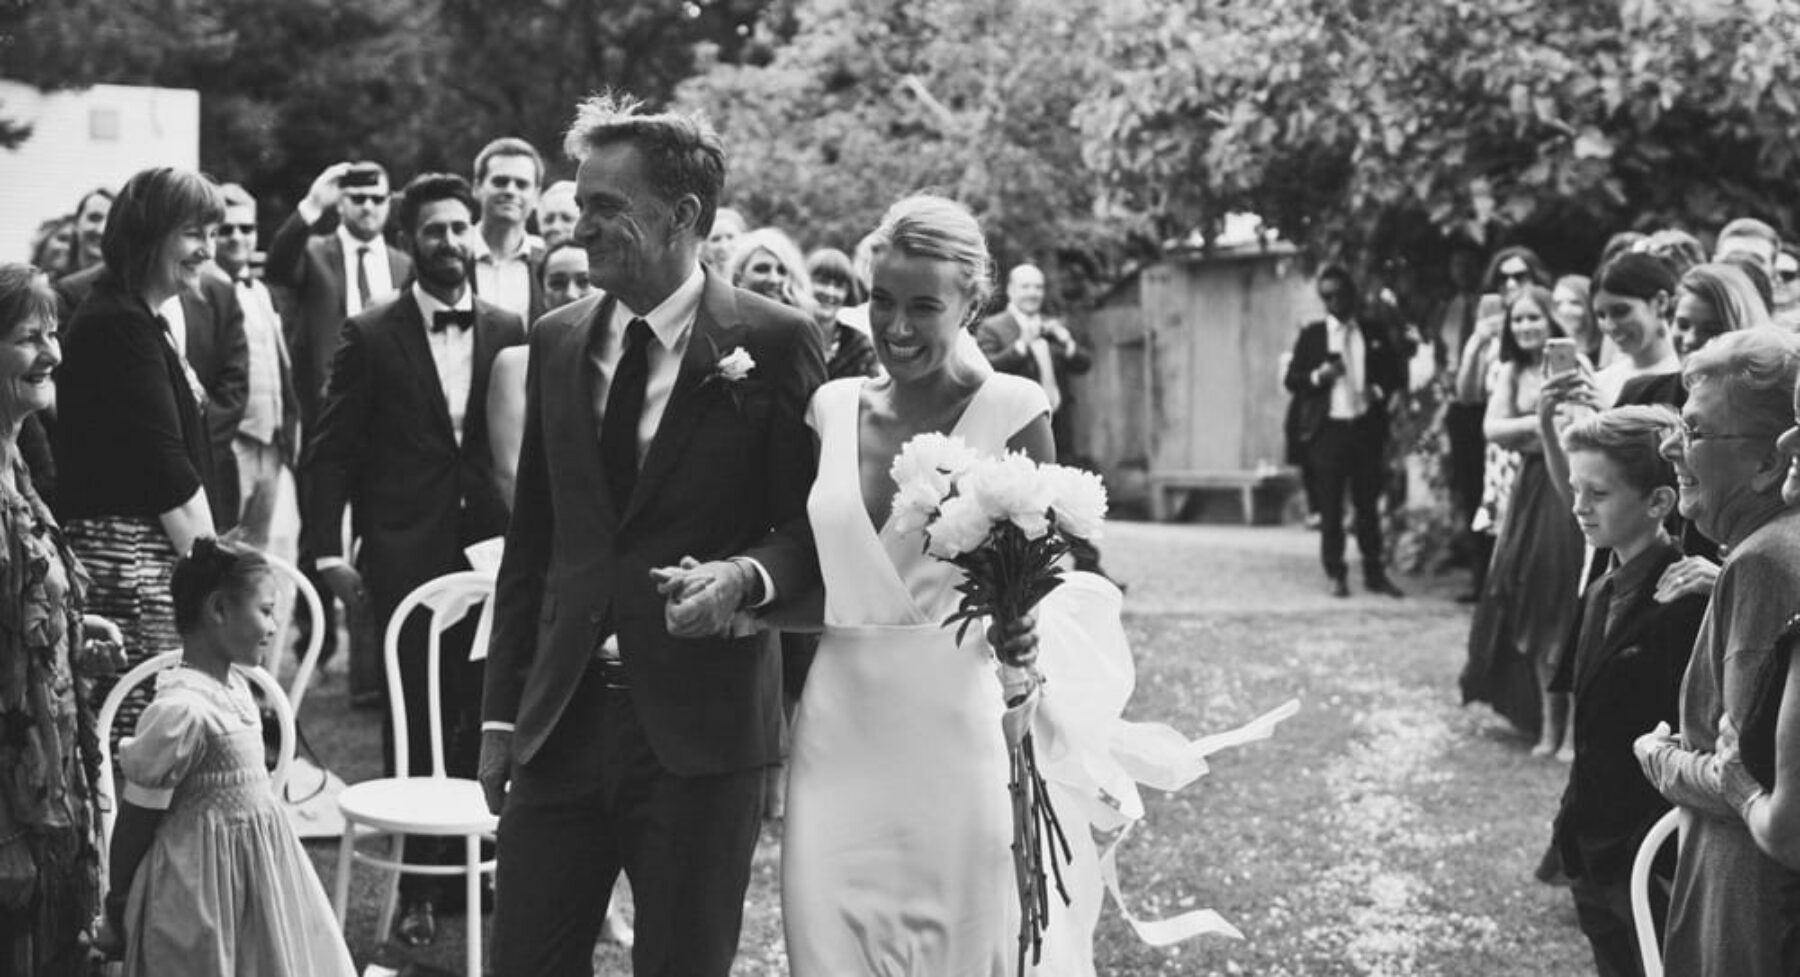 Adelaide Hills wedding at The White House - photography by Whitewall